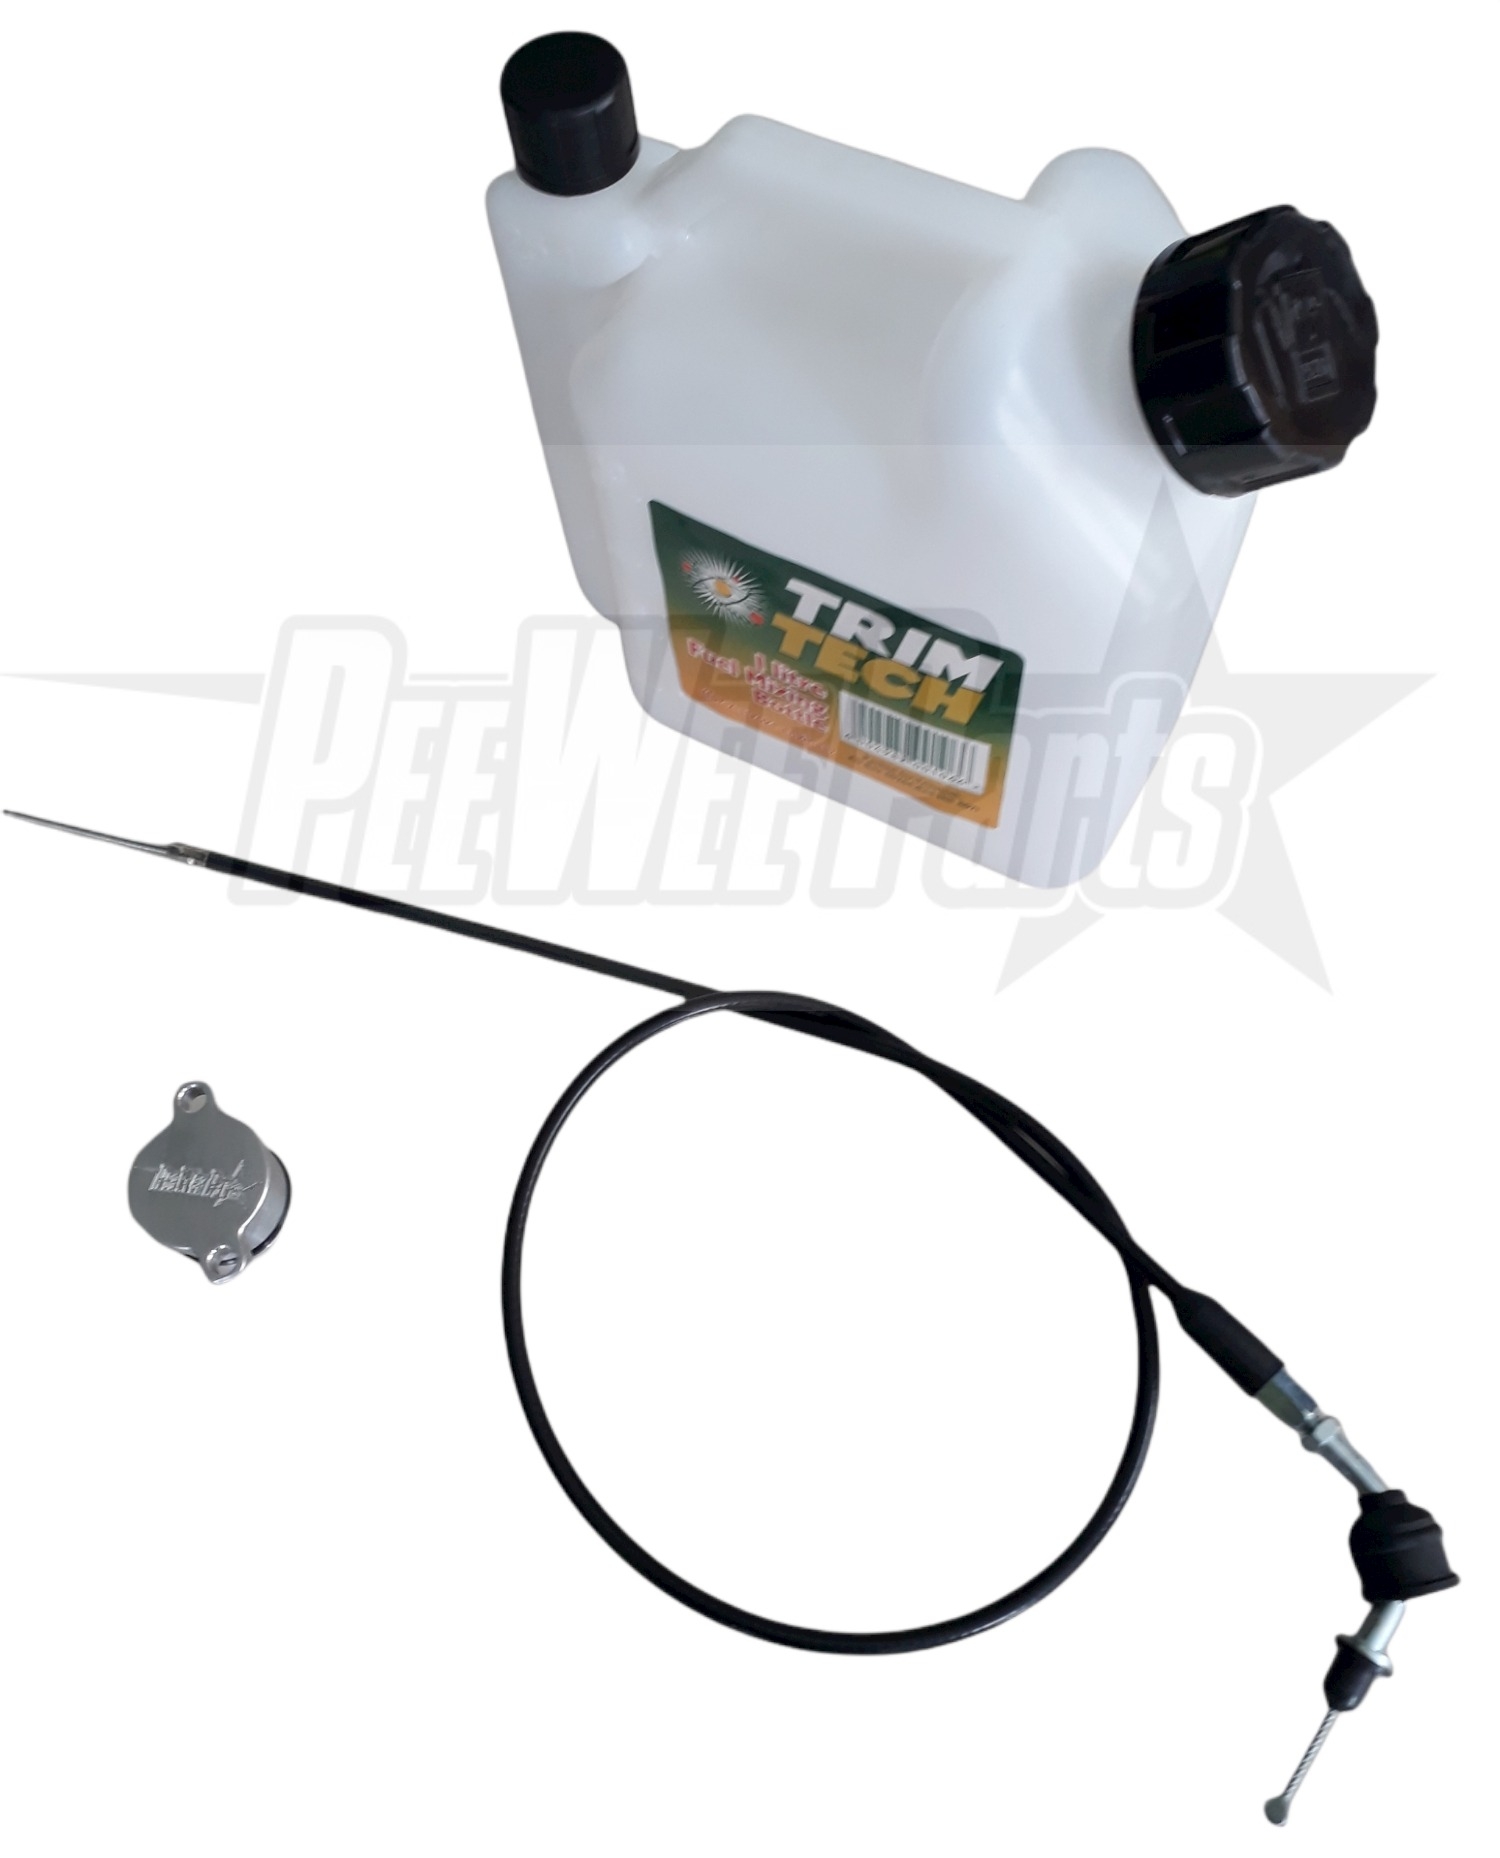 pw50 Two stroke pump removal kit, Oil Mixing Bottle, straight throttle cable and Block off plug-0